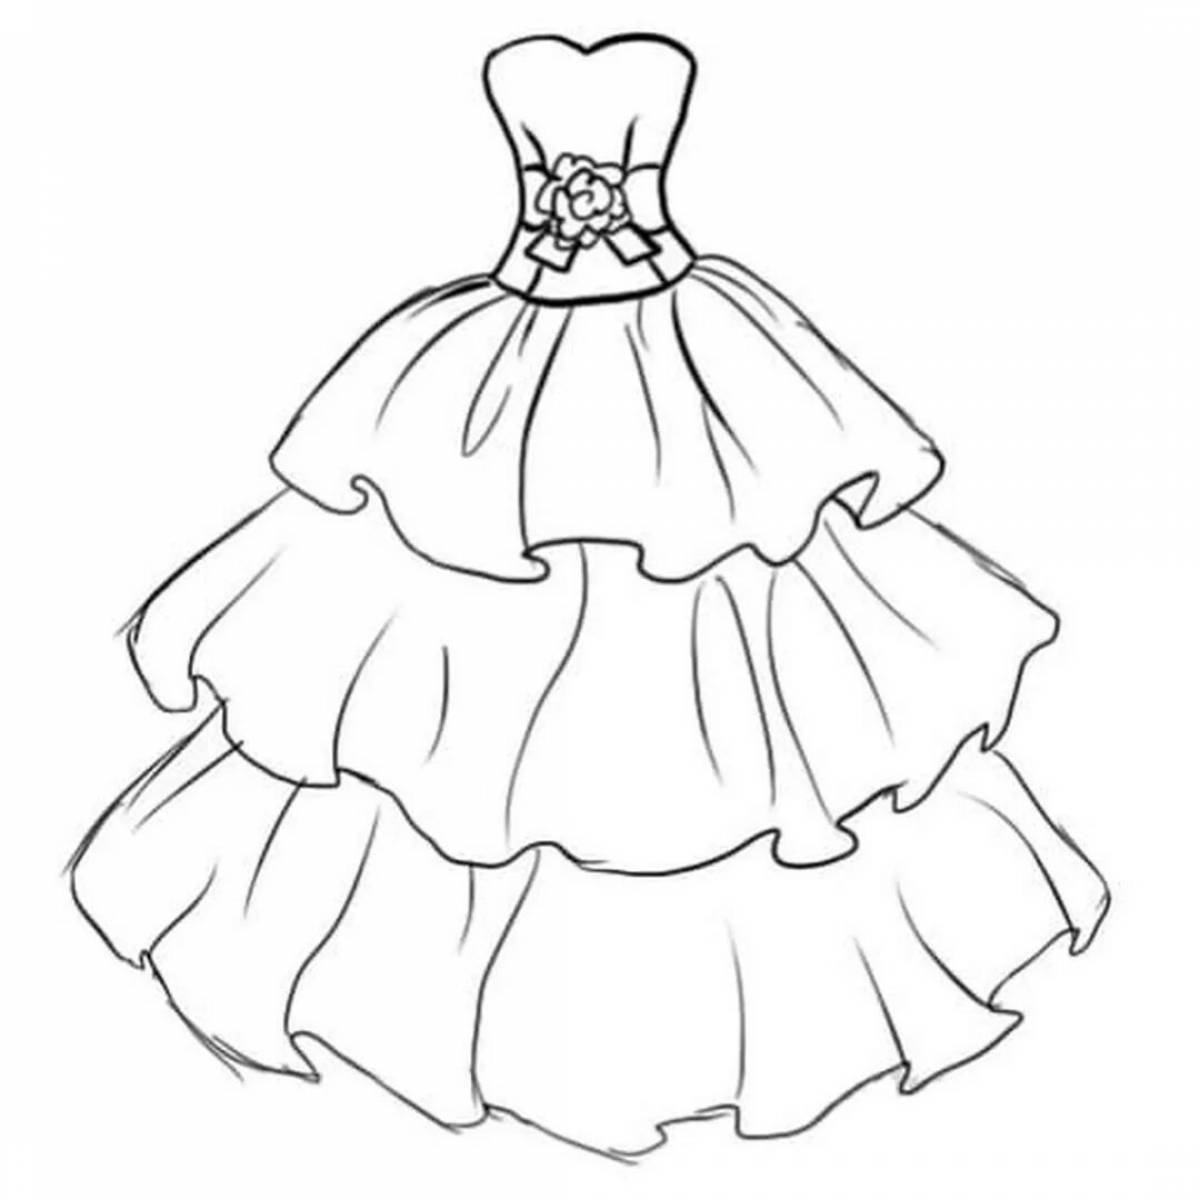 Coloring page grand puffy dress